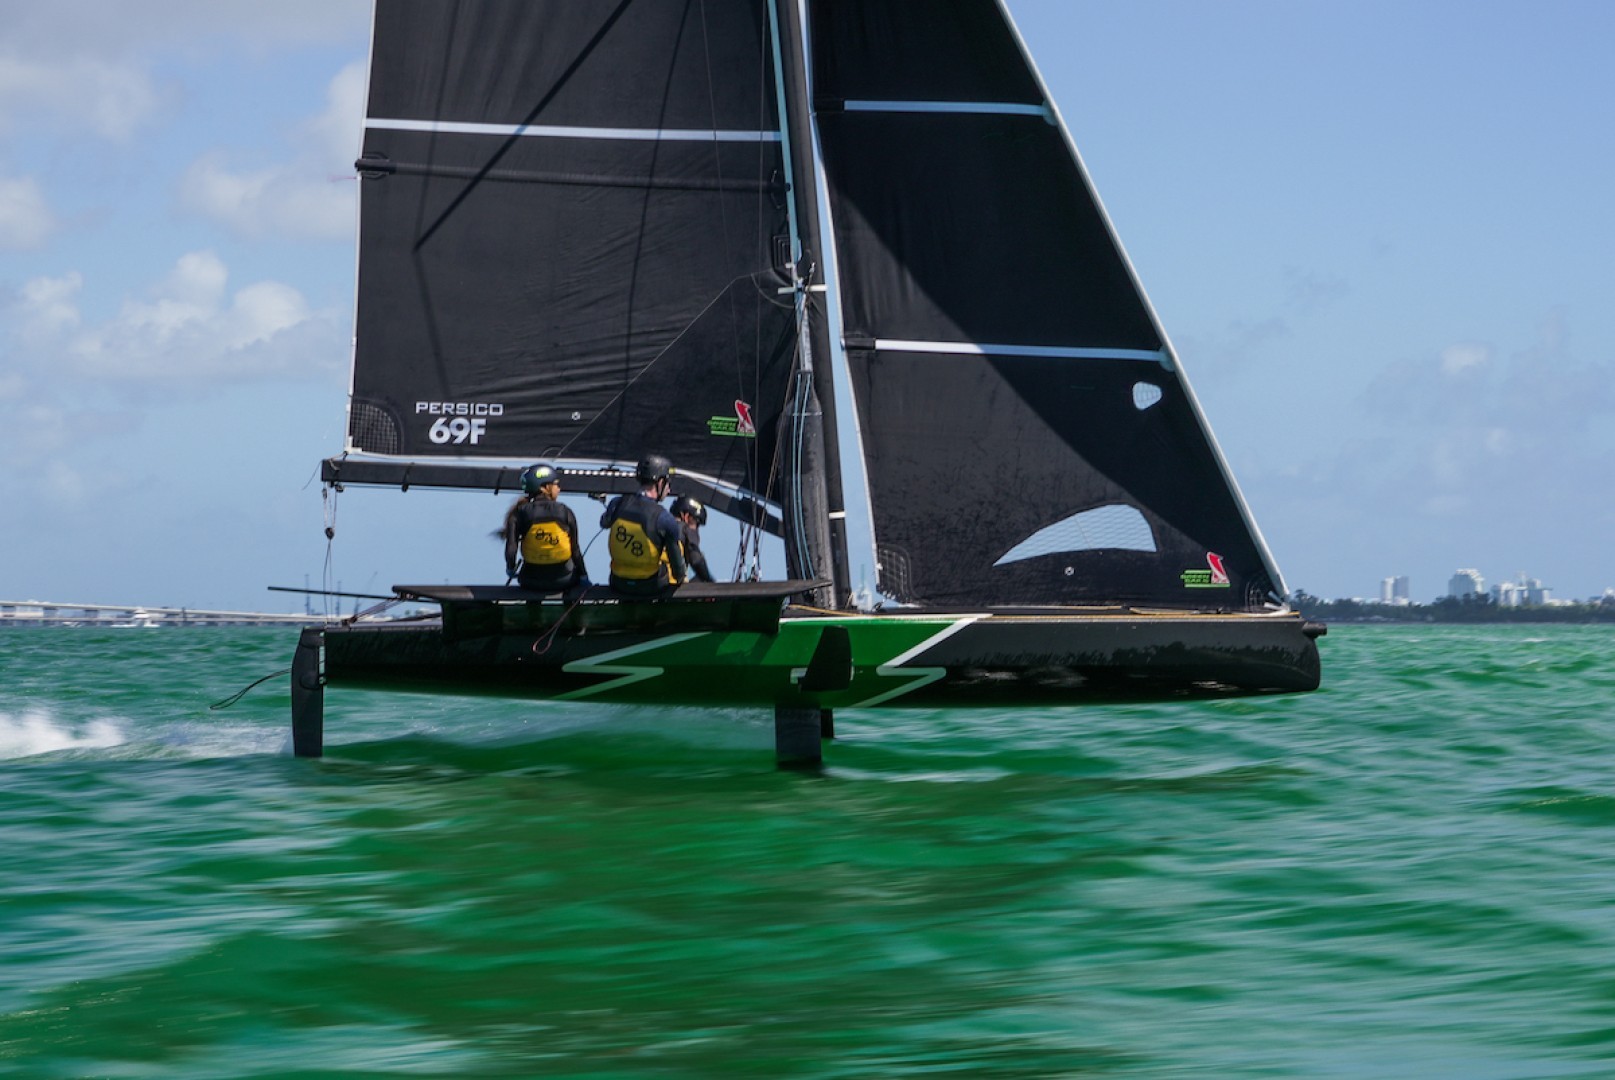 69F Fleet about to get foiling at the Bacardi Cup in Miami